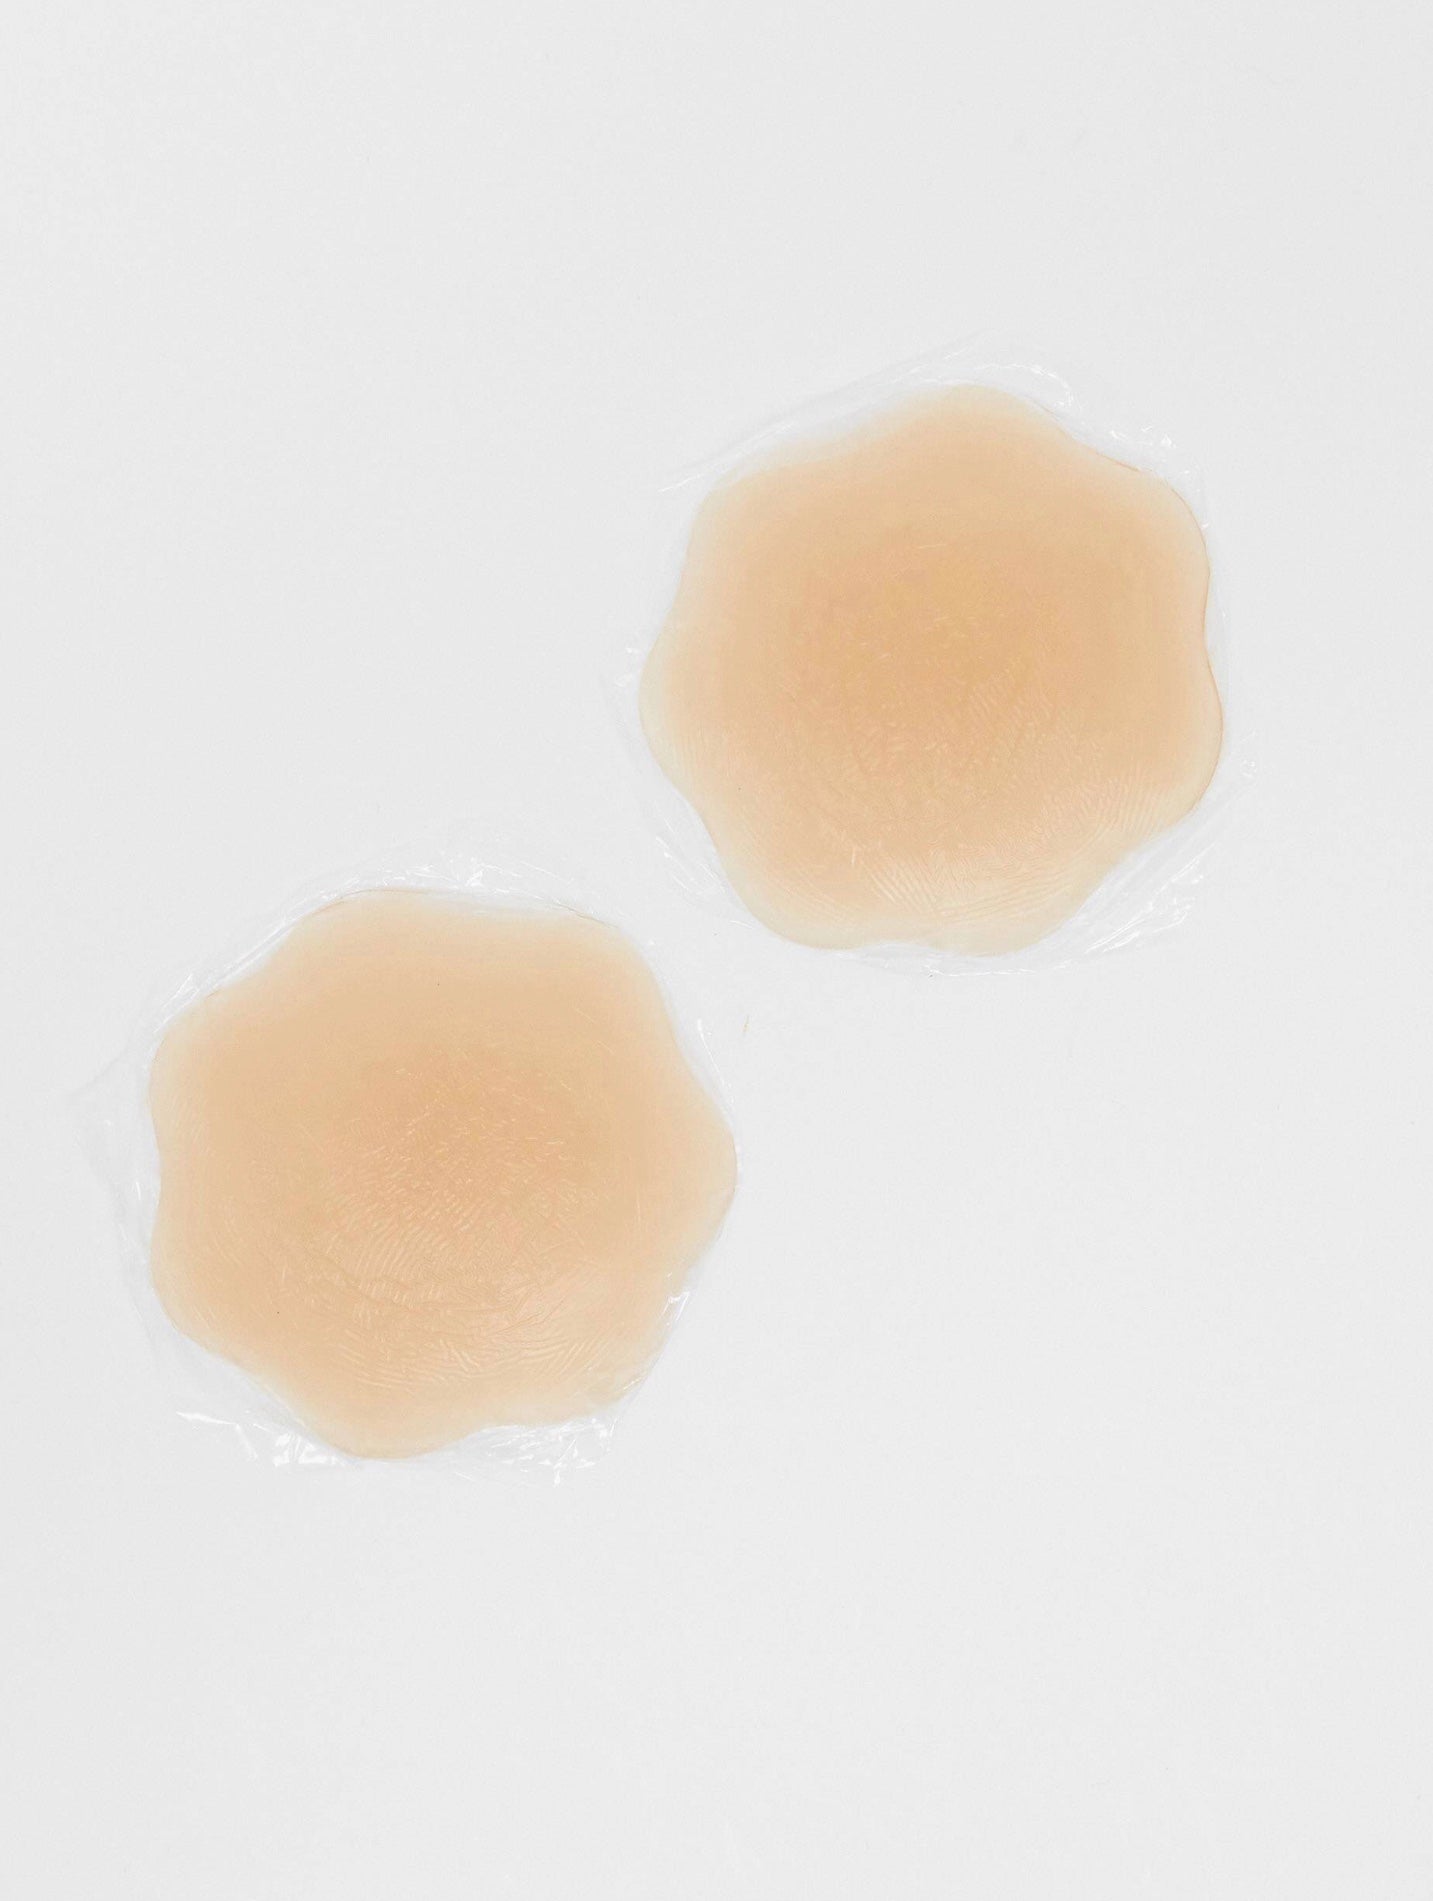 FK Silicone nipple cover pack in tan